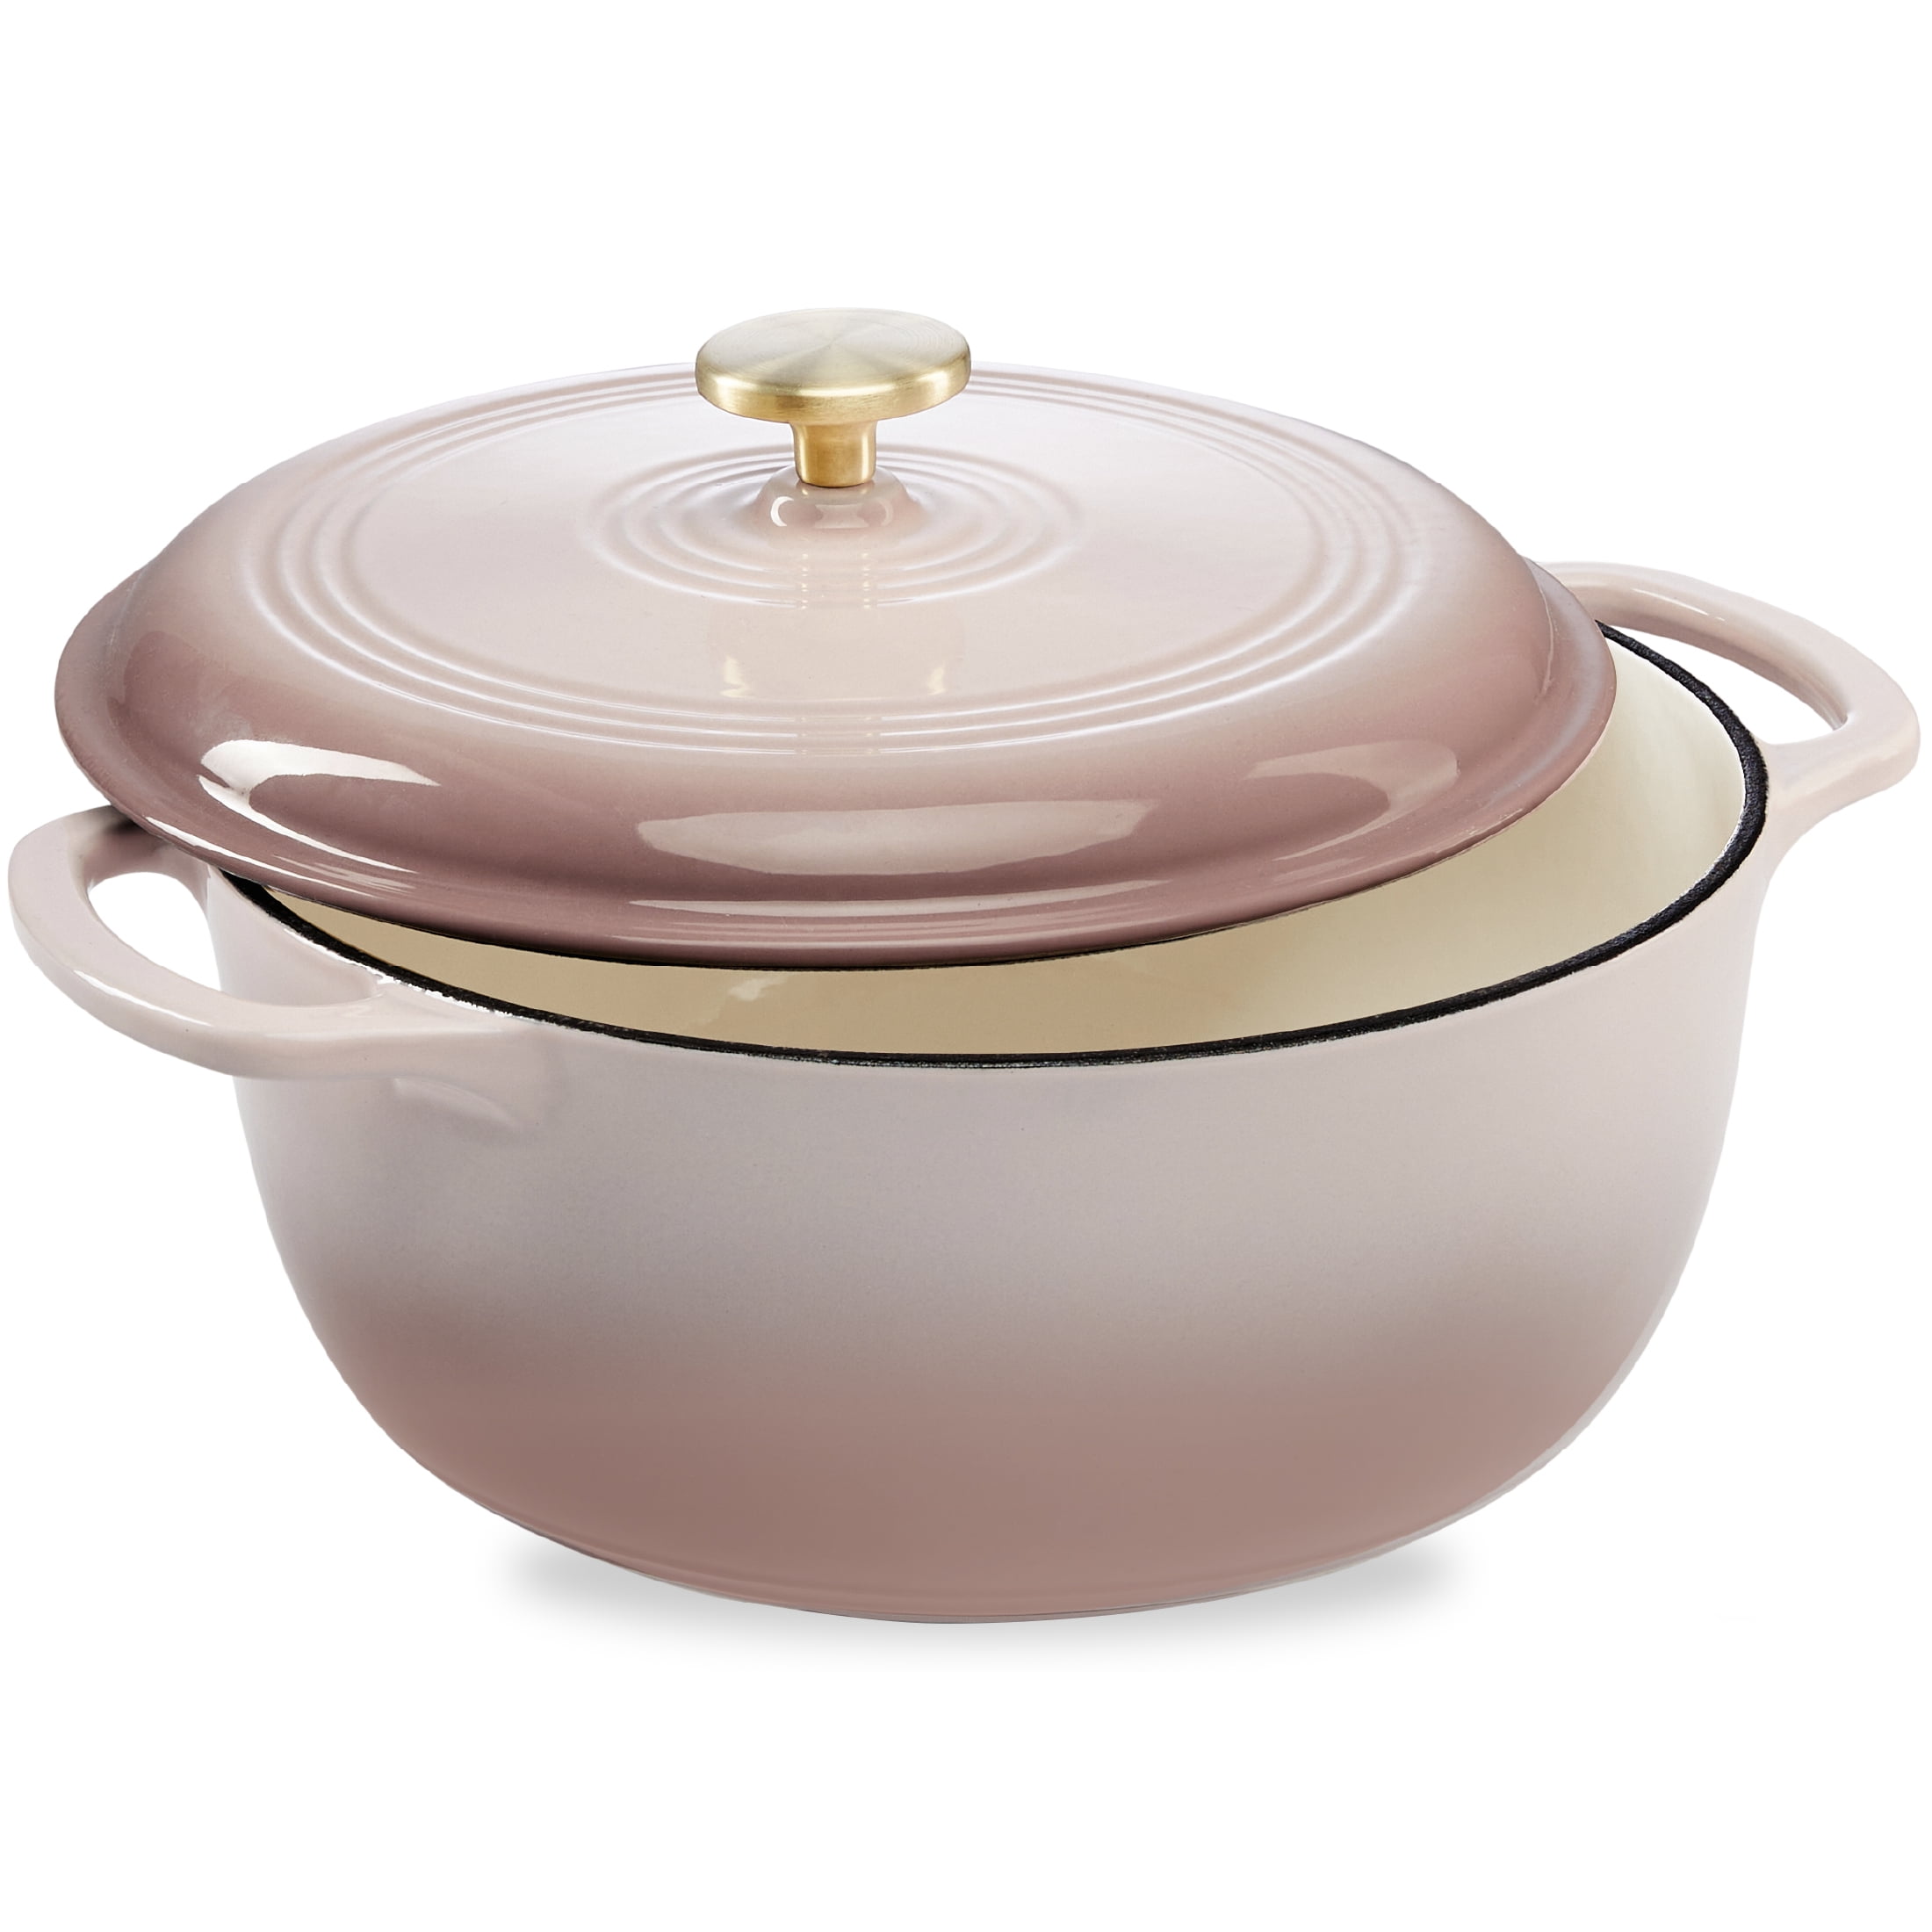 6 Quart Enameled Cast Iron Dutch Oven Pot with Lid — Round Enamel Coating,  Safe up to 500° F, Dual Side Handles, Ideal for Baking, Roasting and